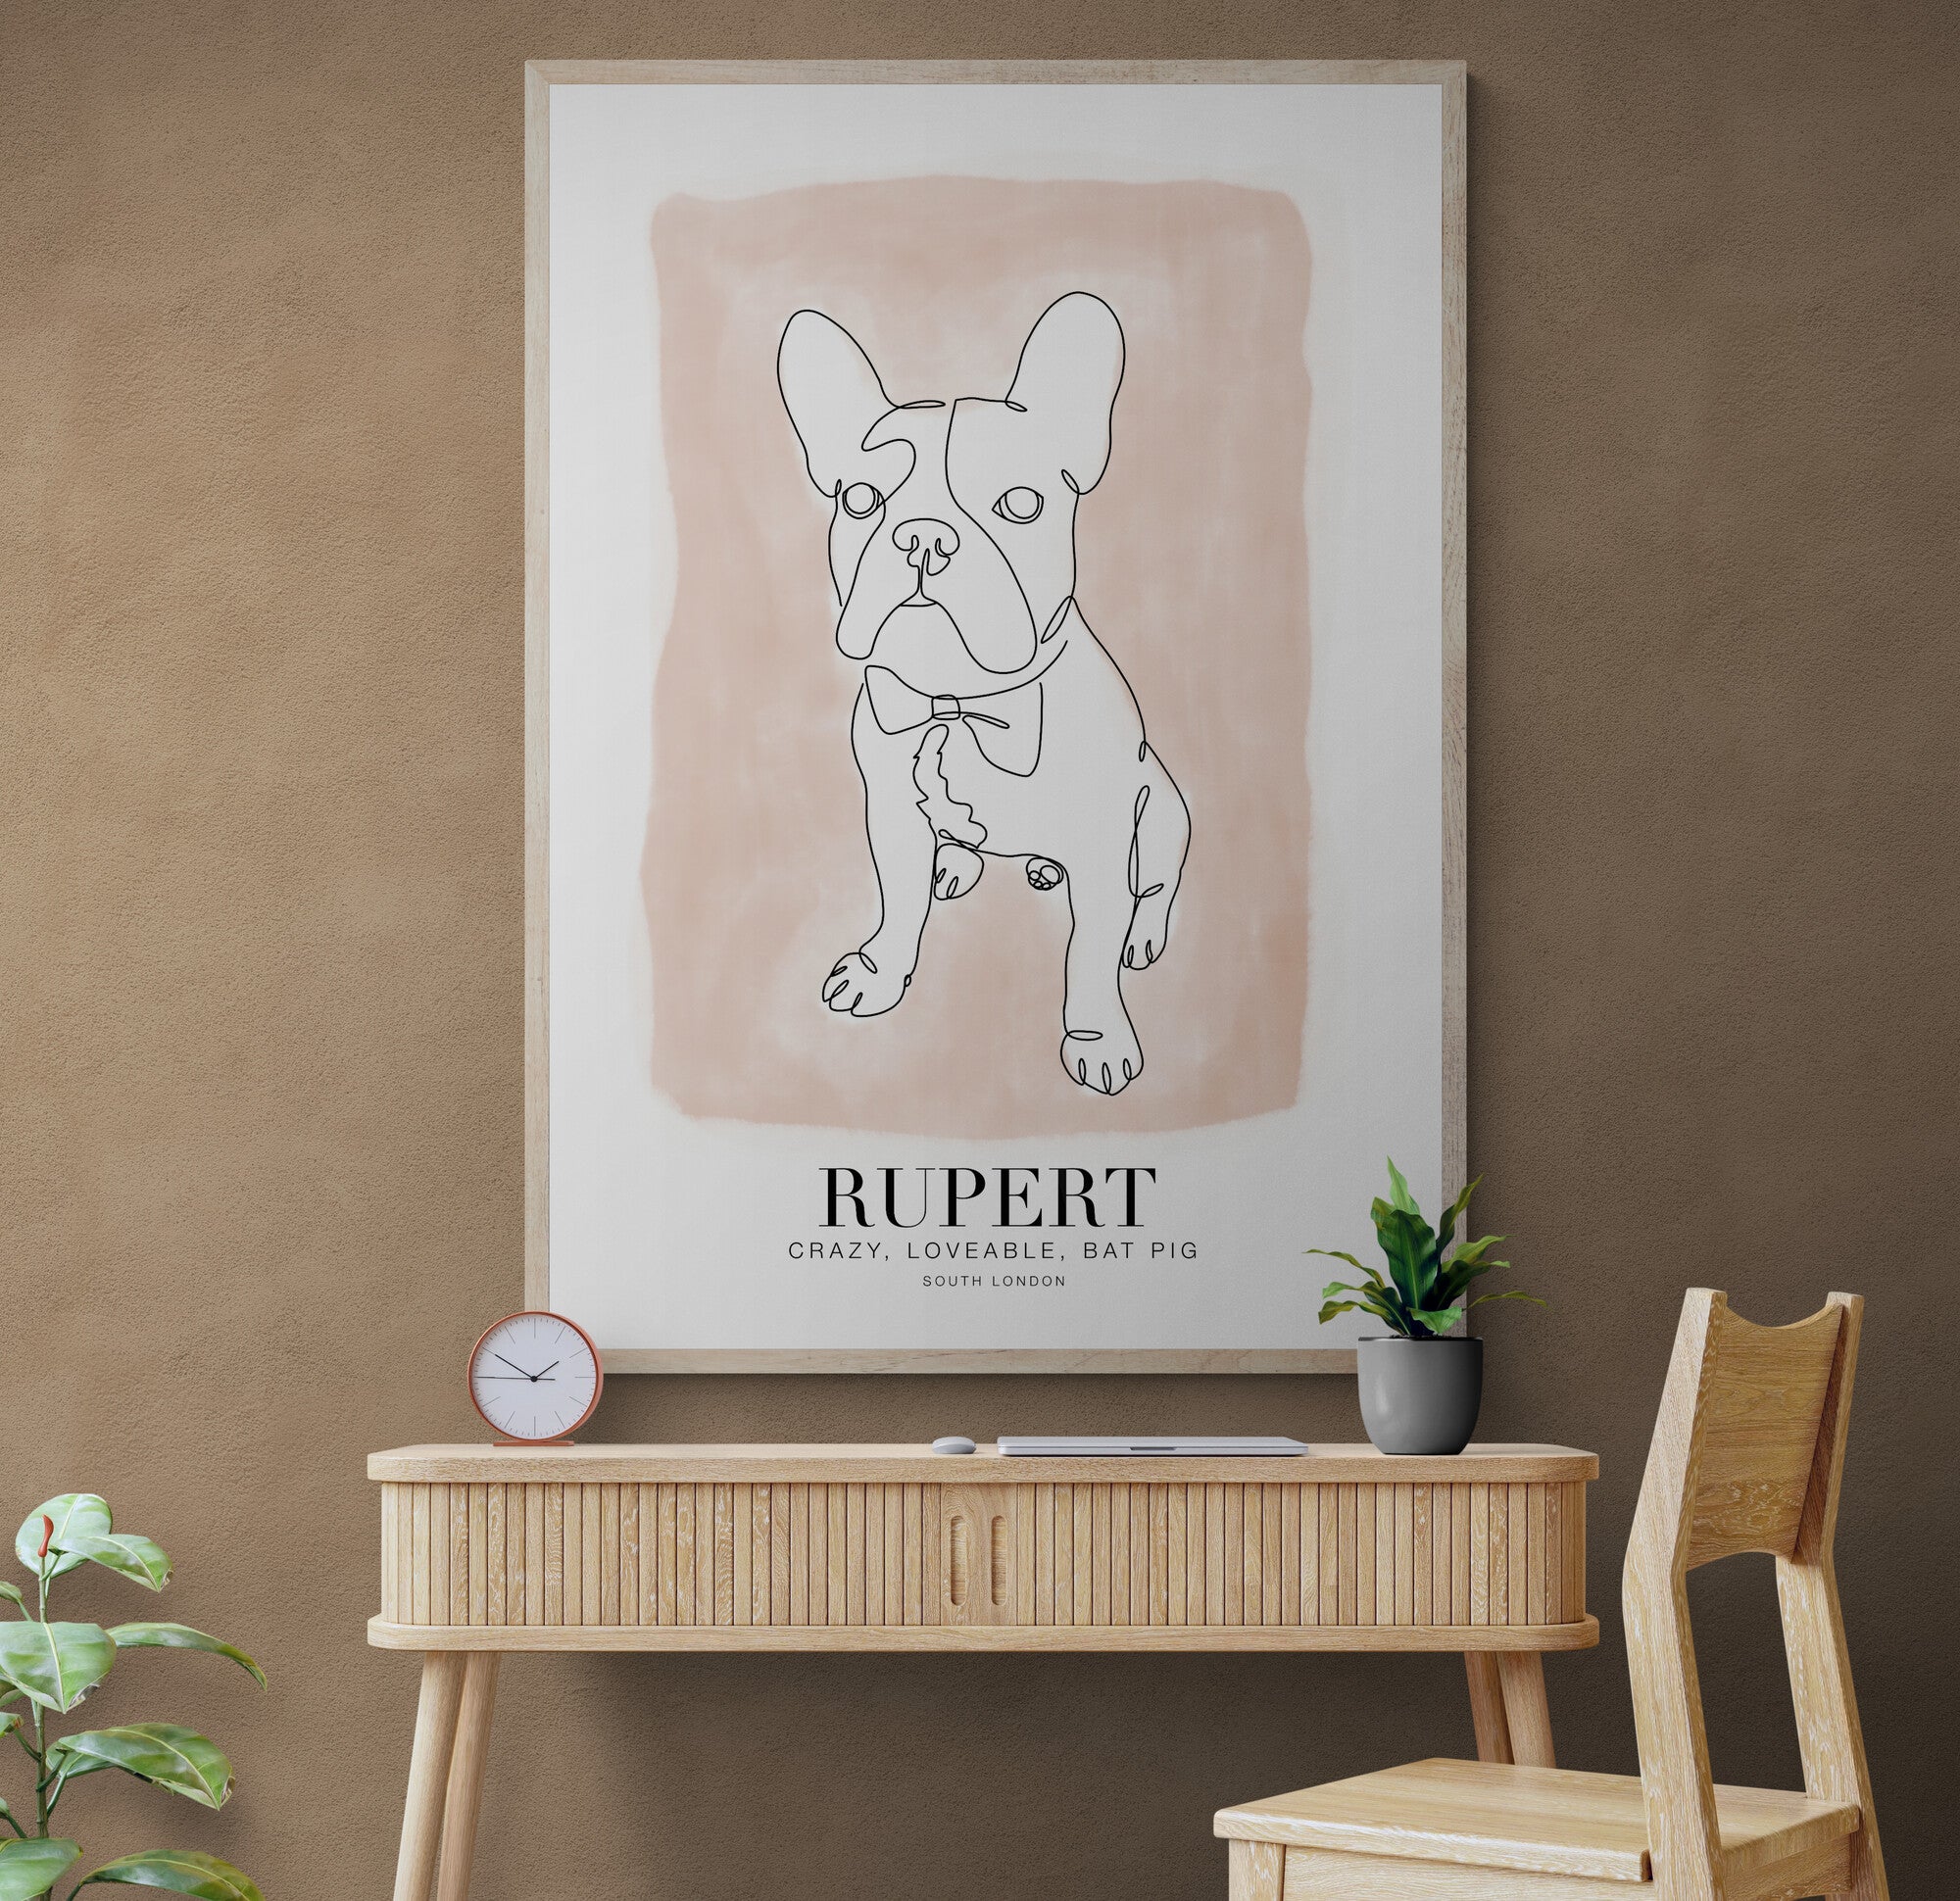 Preserving Paw-some Memories: The Delight of Personalized Pet Portraits